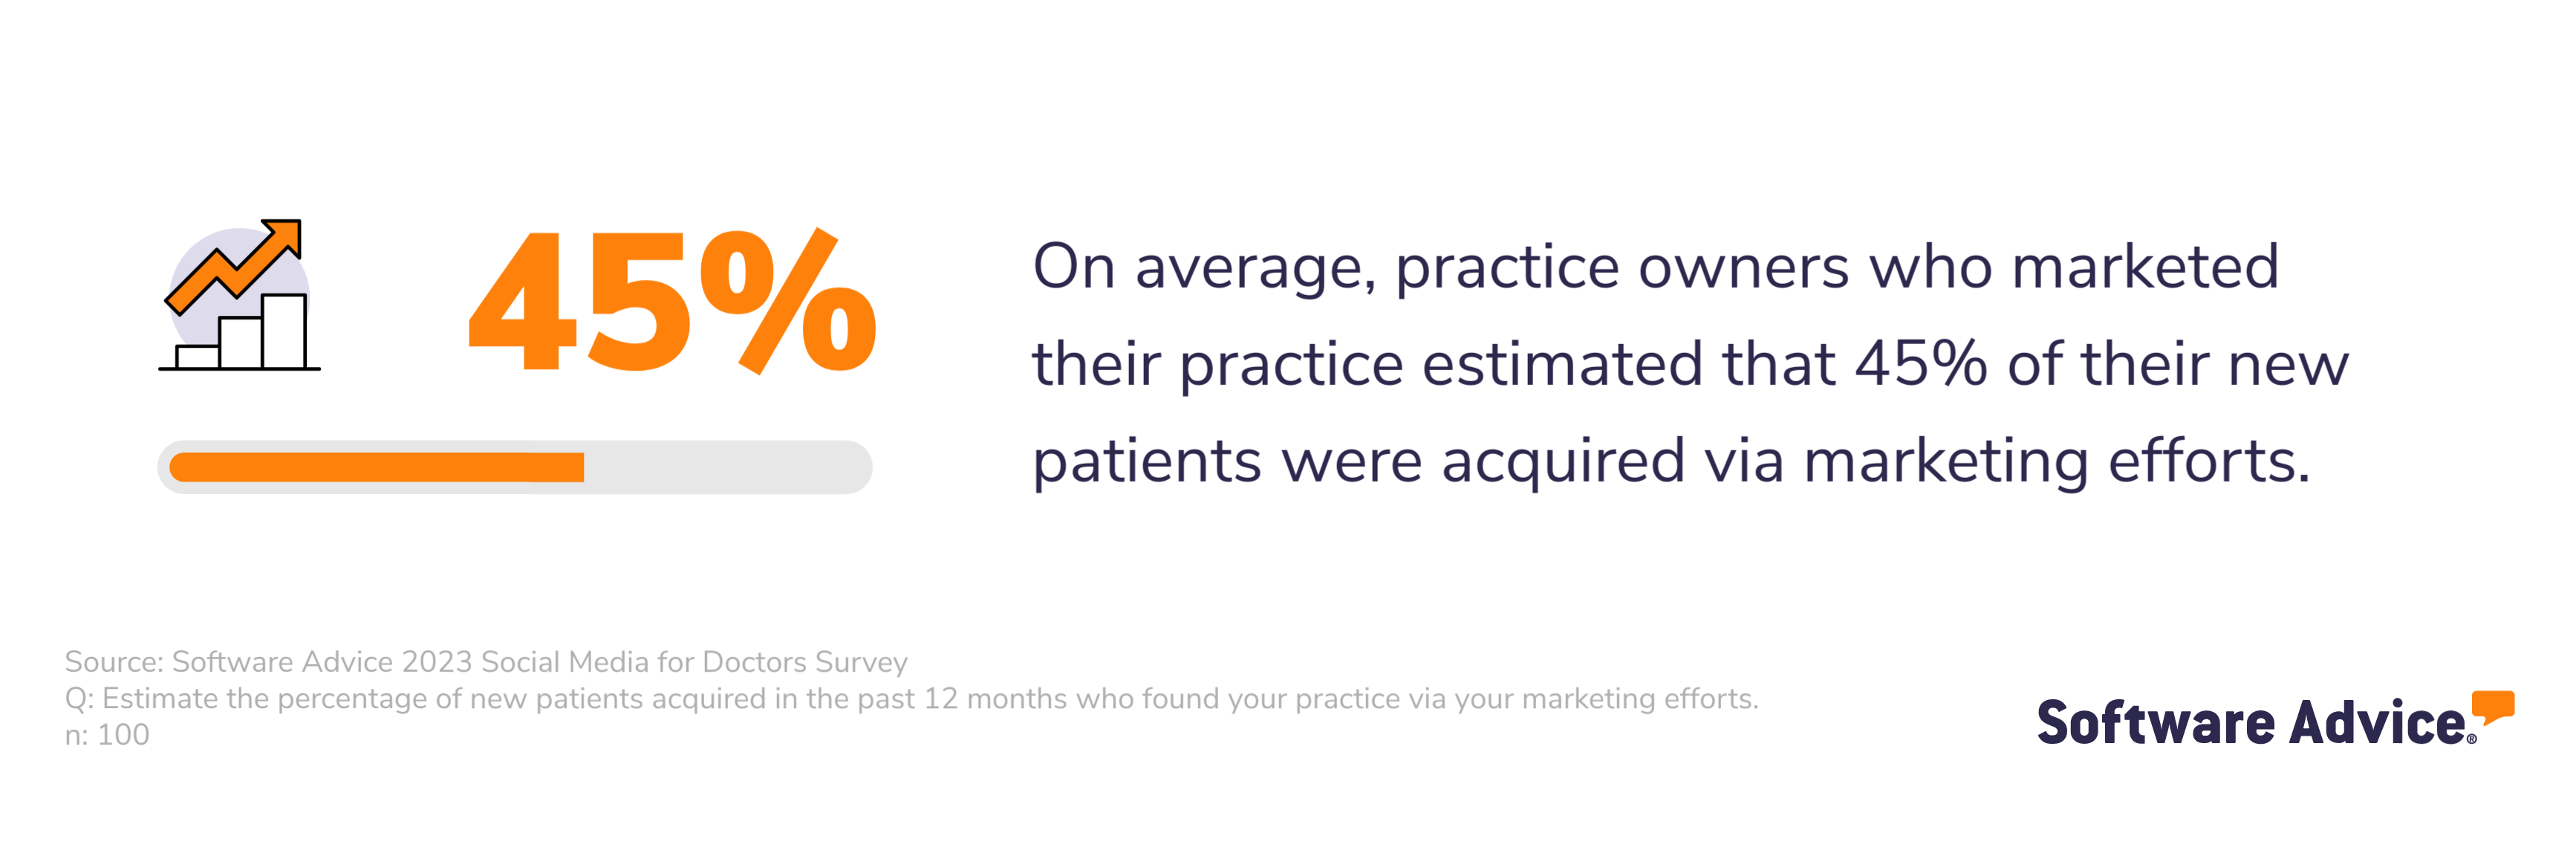 On average, practice owners who marketed their practice estimated that 45% of their new patients were acquired via marketing efforts.